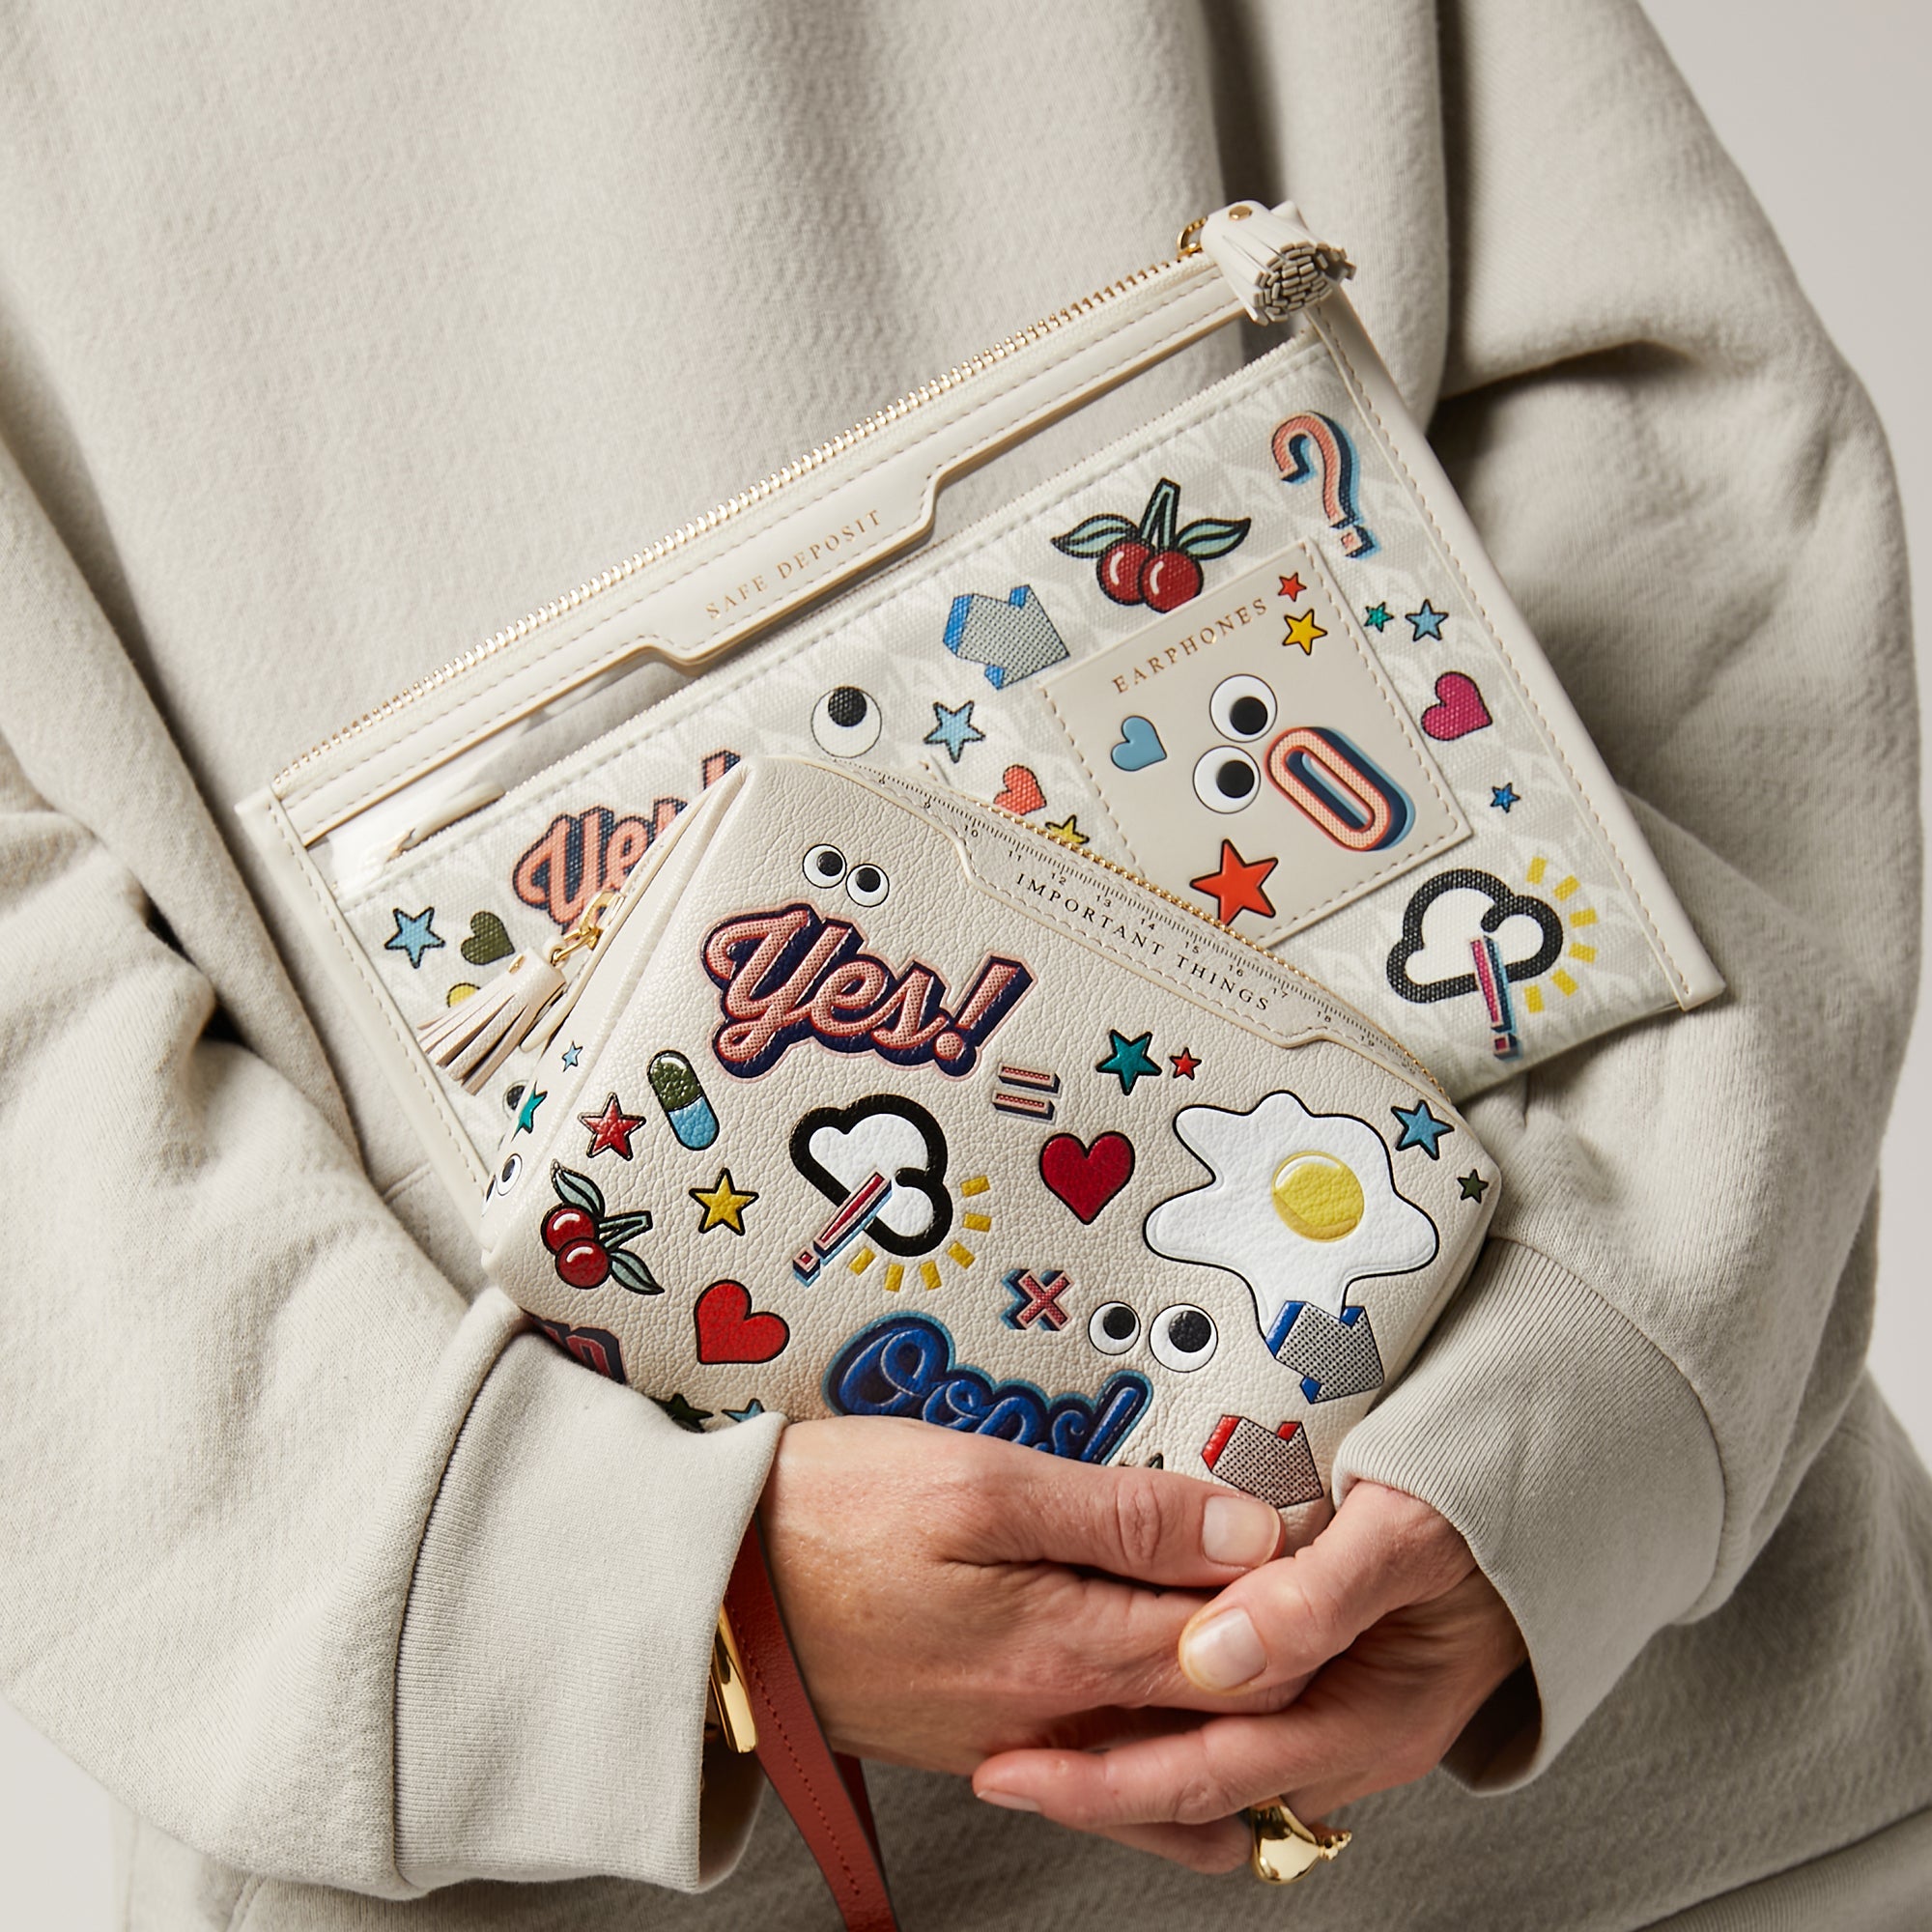 All Over Stickers Safe Deposit Case -

                  
                    Recycled Canvas in Chalk -
                  

                  Anya Hindmarch US
